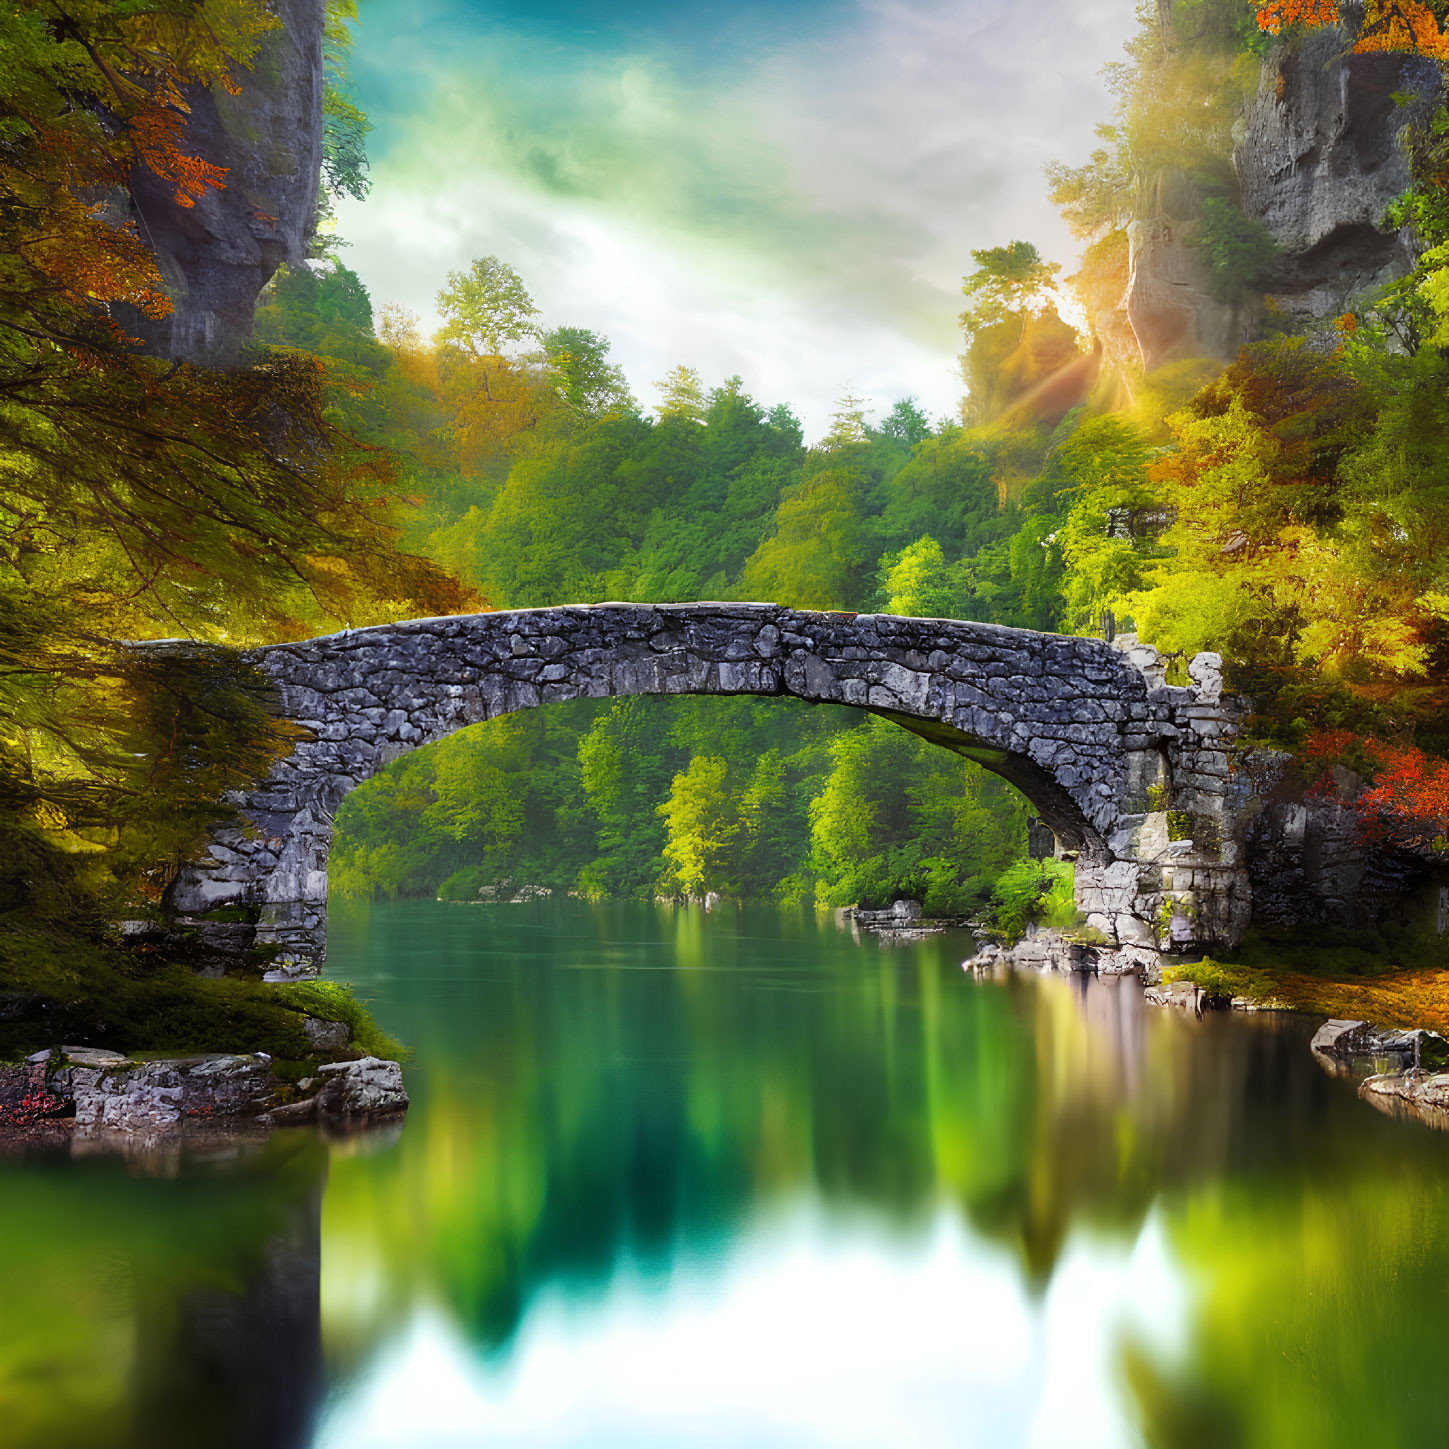 Stone arch bridge over tranquil river surrounded by autumn trees under bright sunbeam